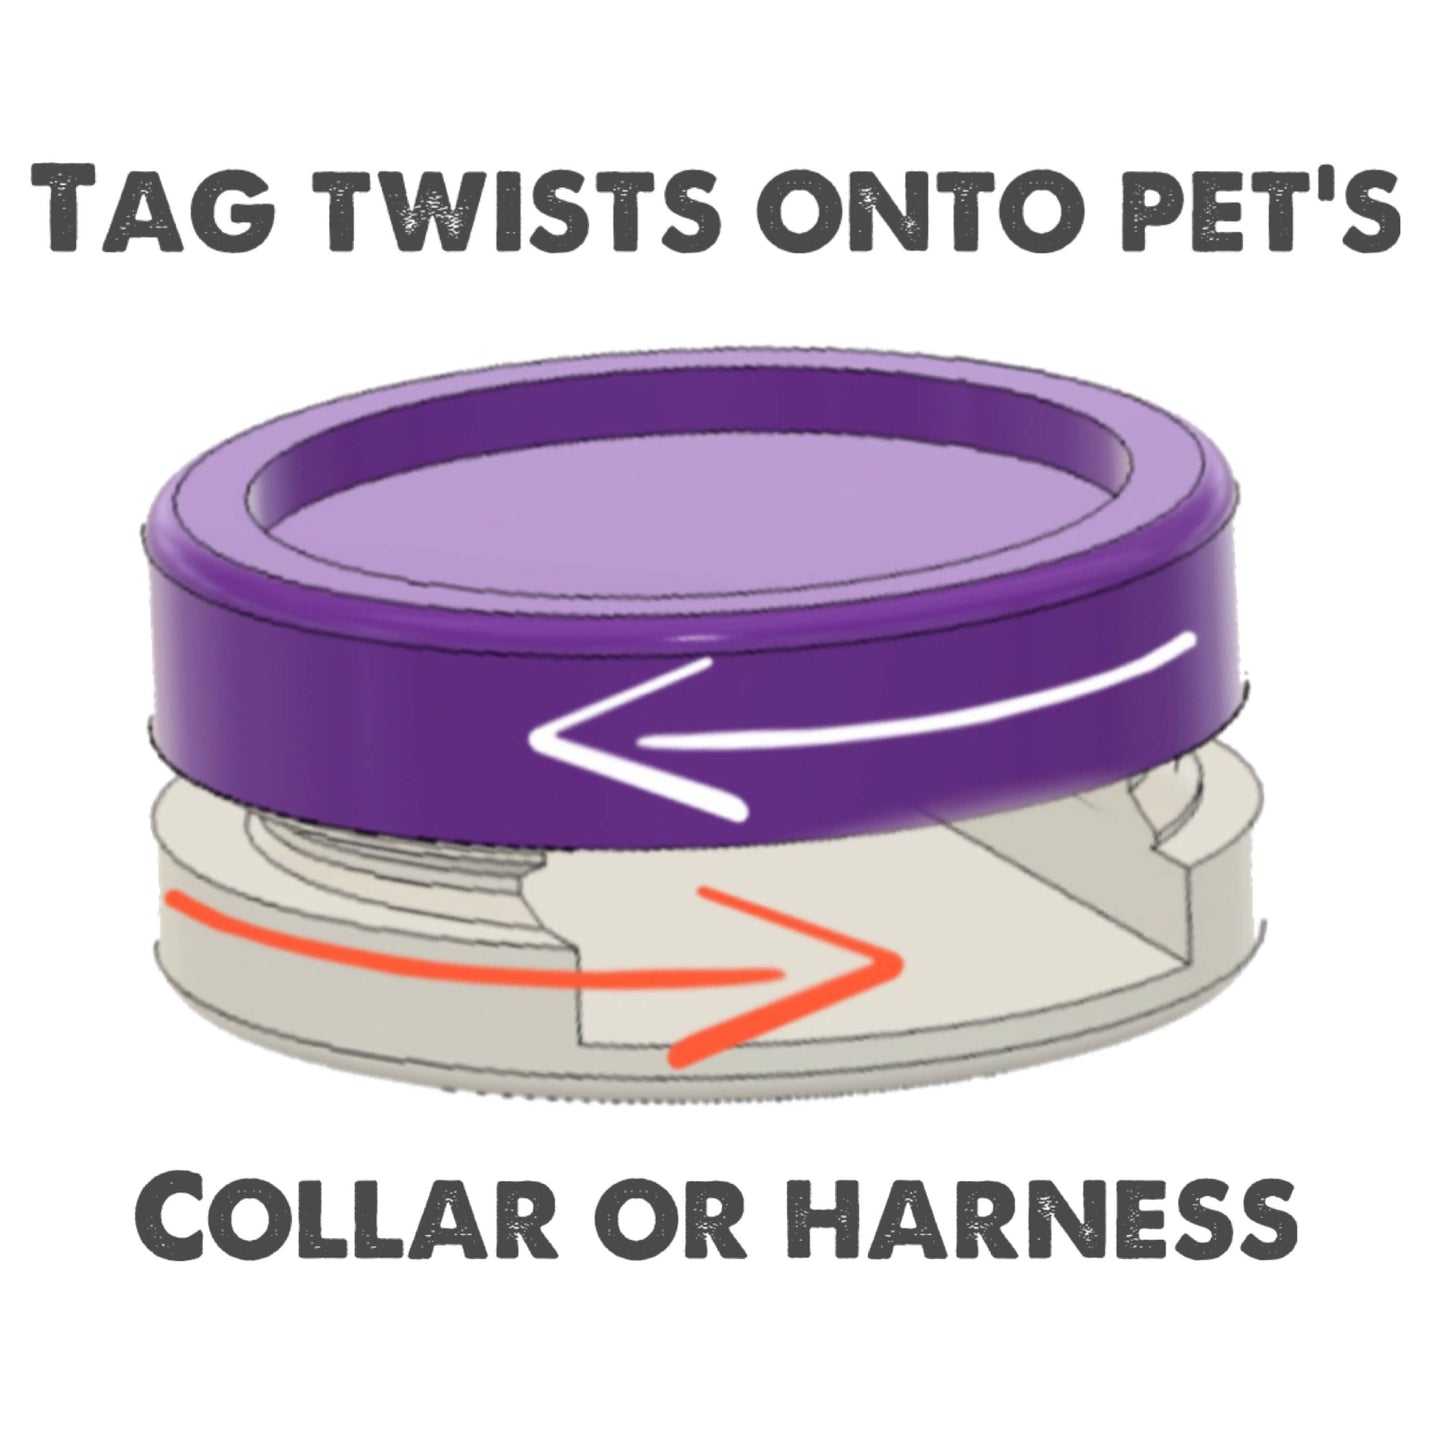 Mardi Paw Tag- Silent, Eco-Friendly, Ringless ID Tag for Cats and Dogs Mardi Gras Pattern